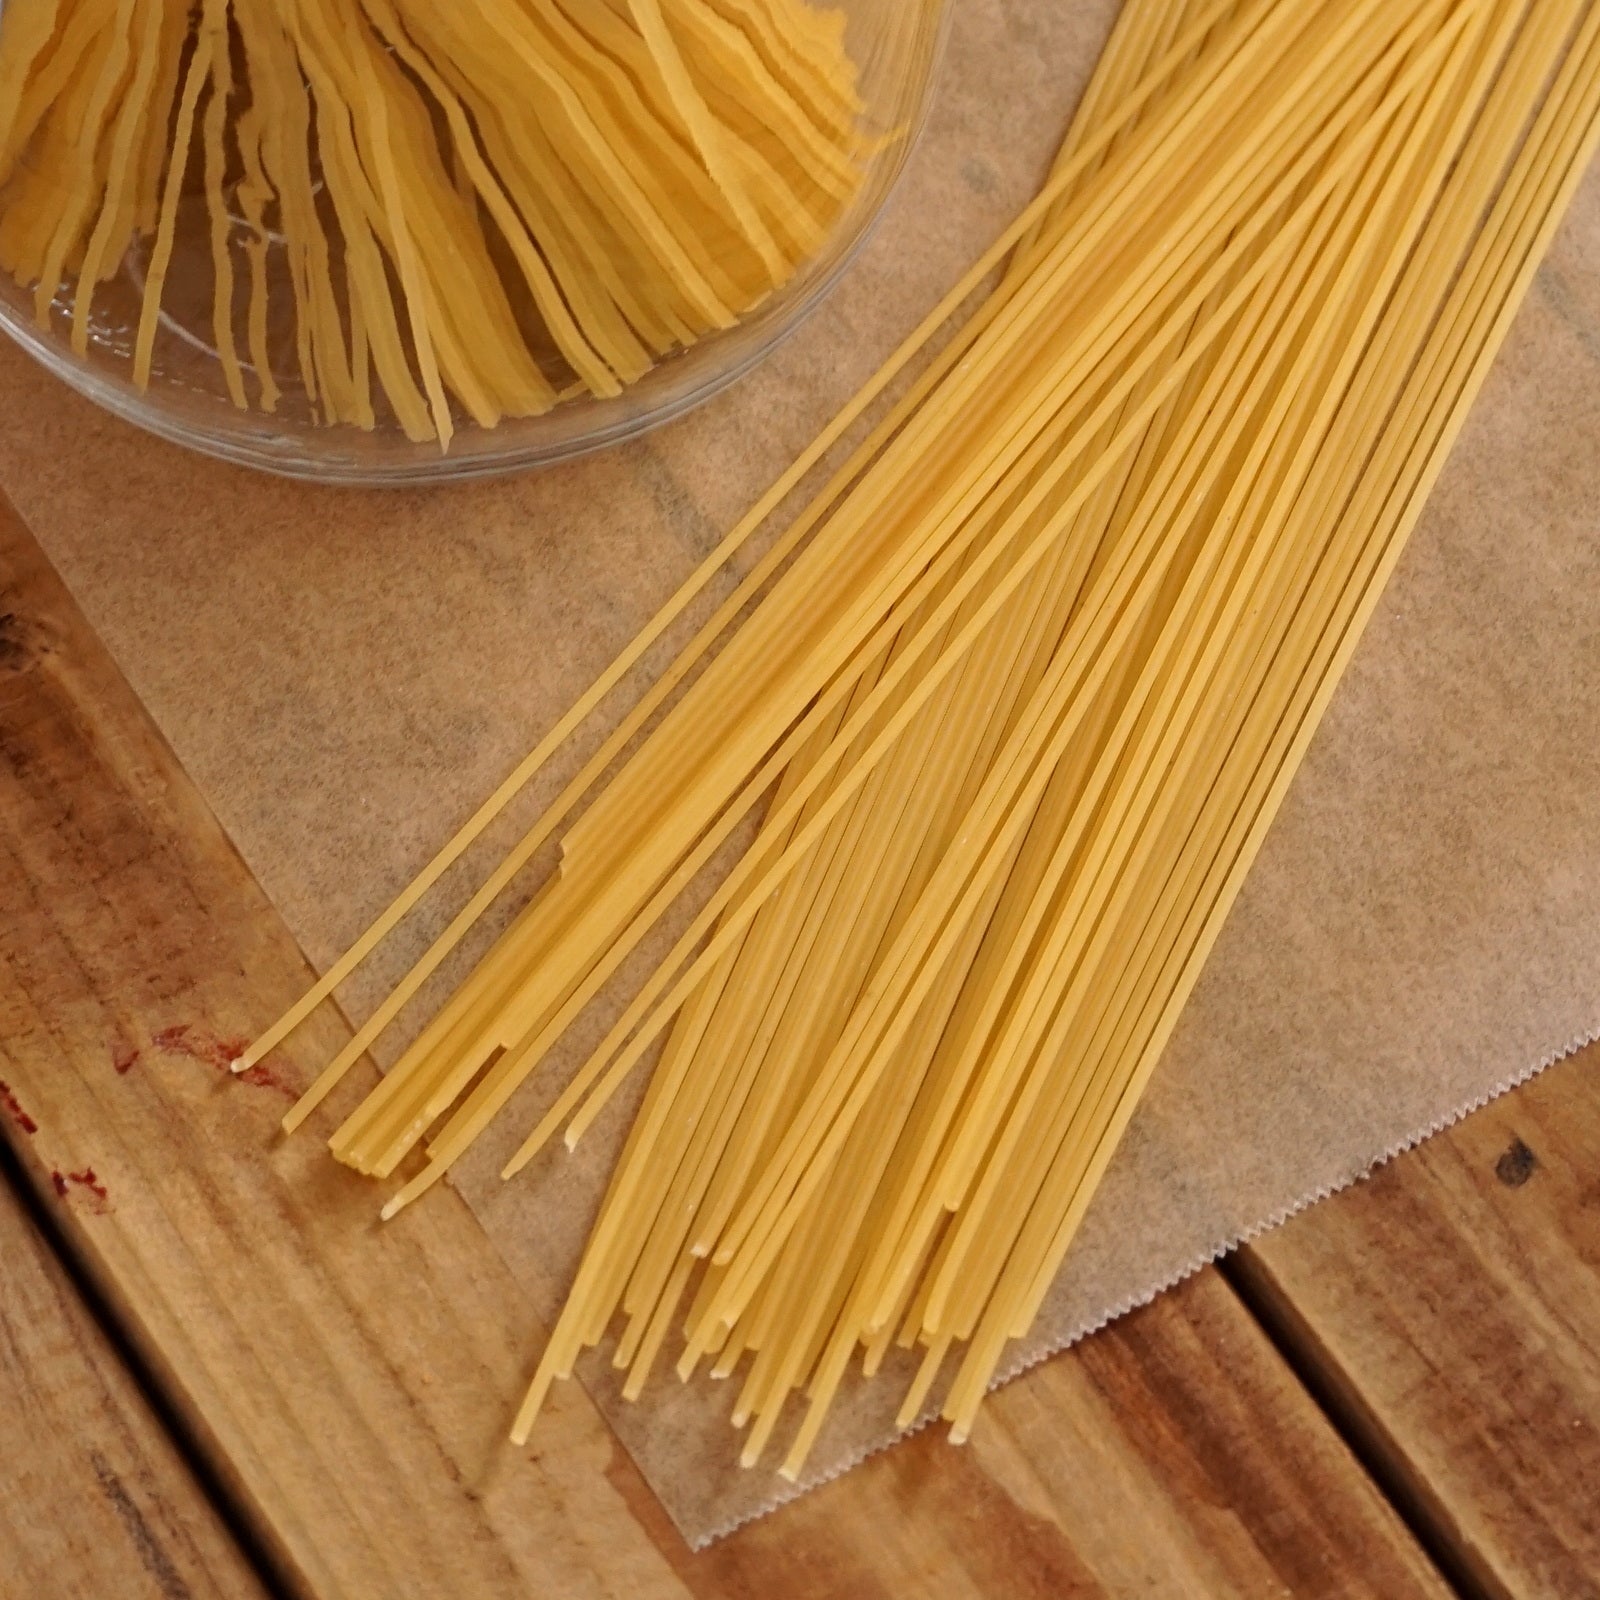 Certified Organic Spaghetti Pasta from Italy 1.7mm (500g x 3)